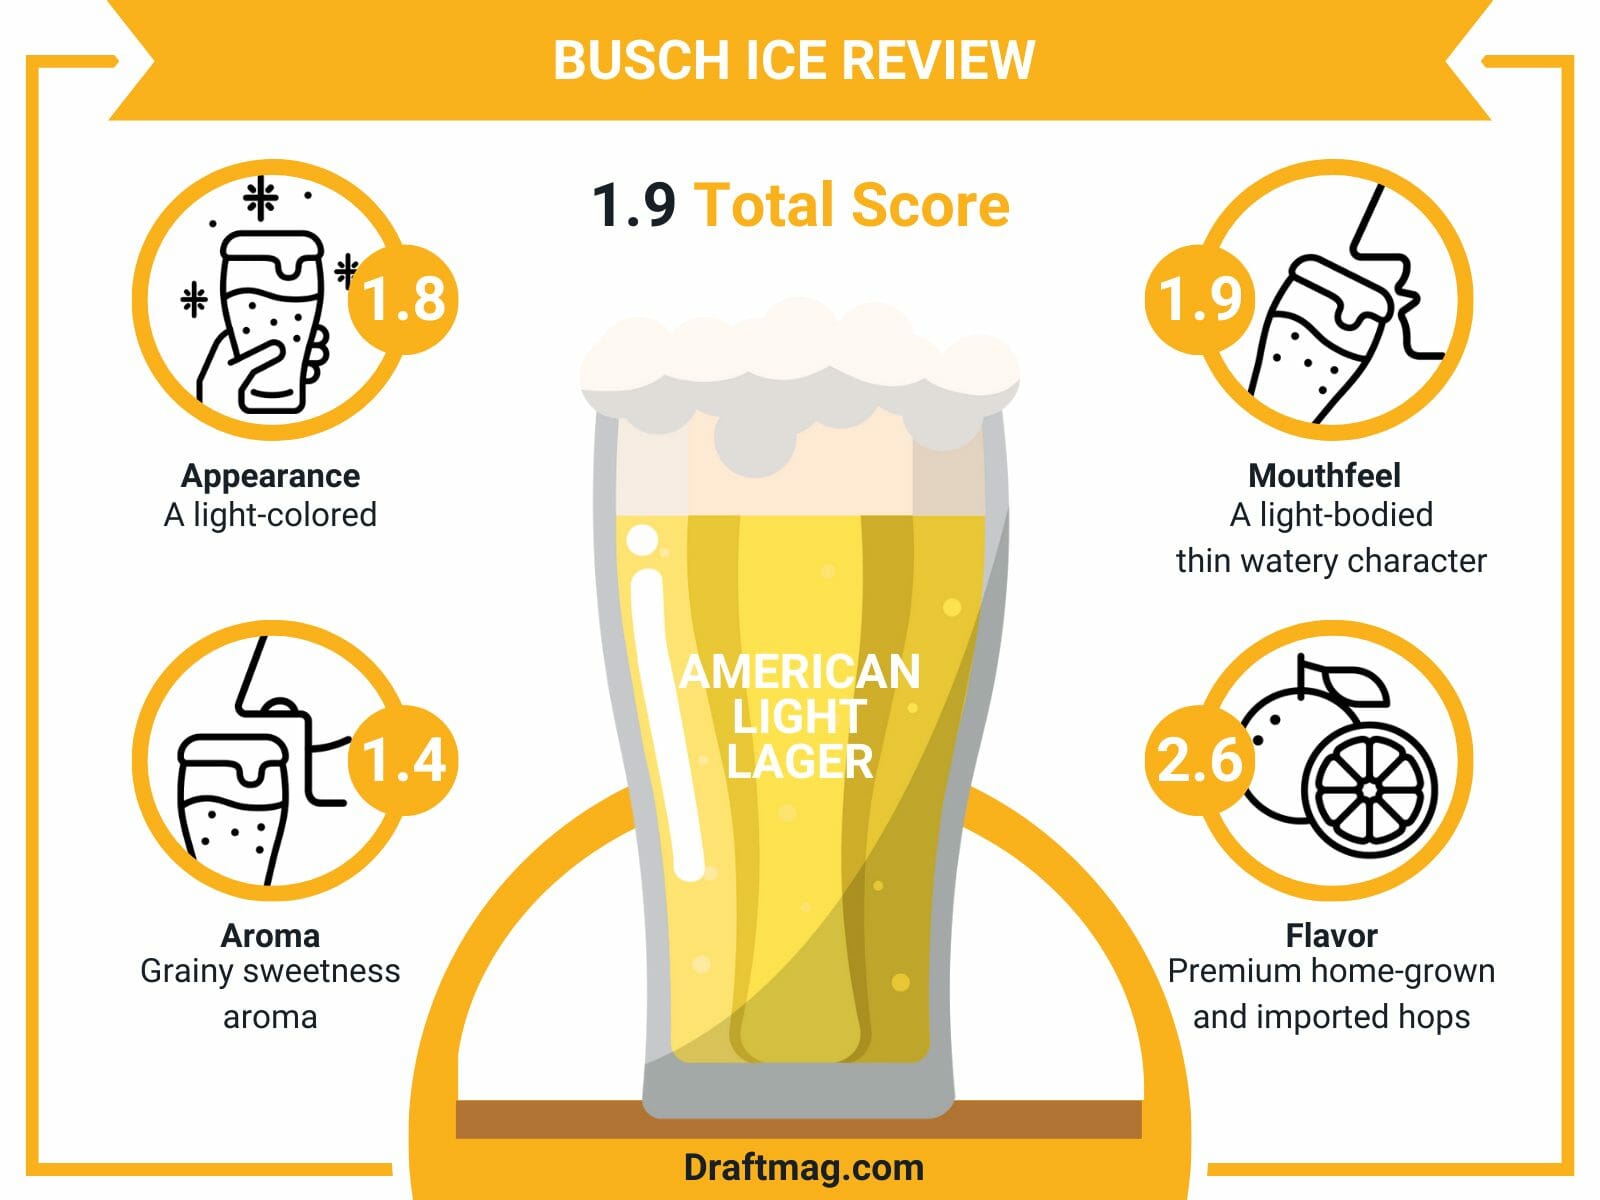 Busch ice review infographic